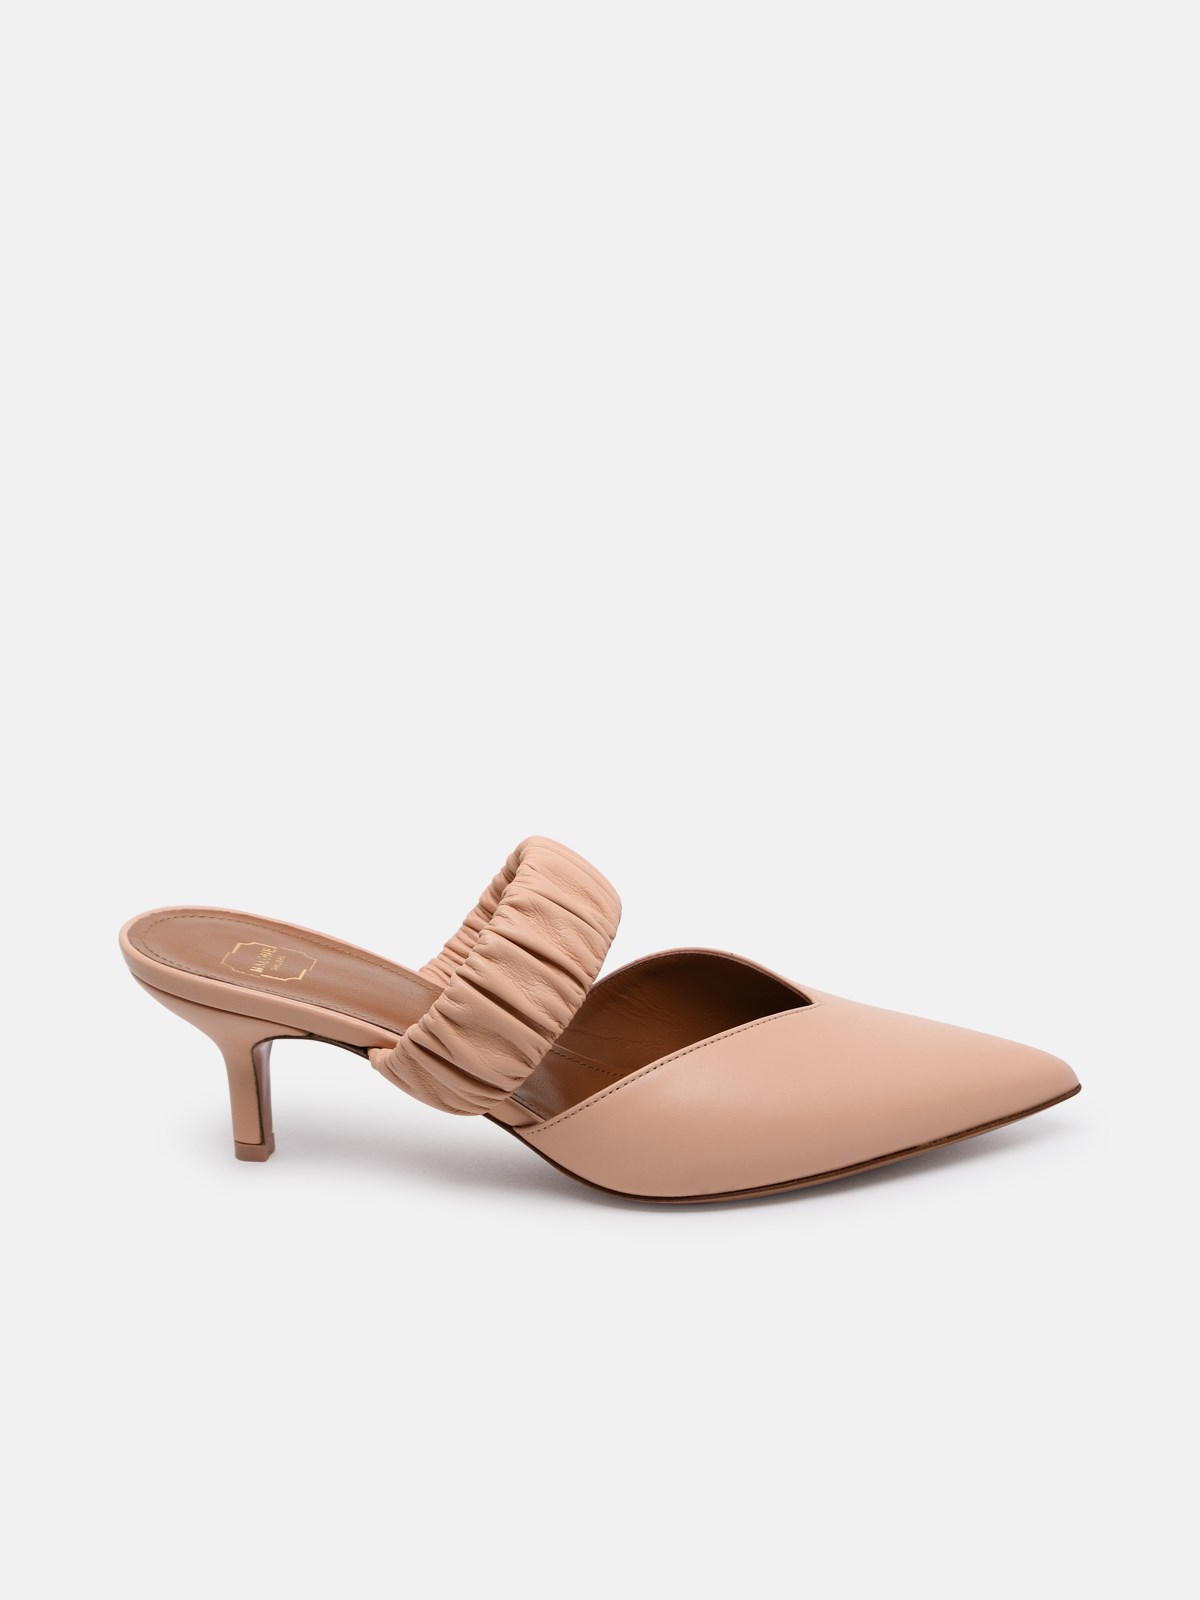 Malone Souliers Matilda Nude Sandals